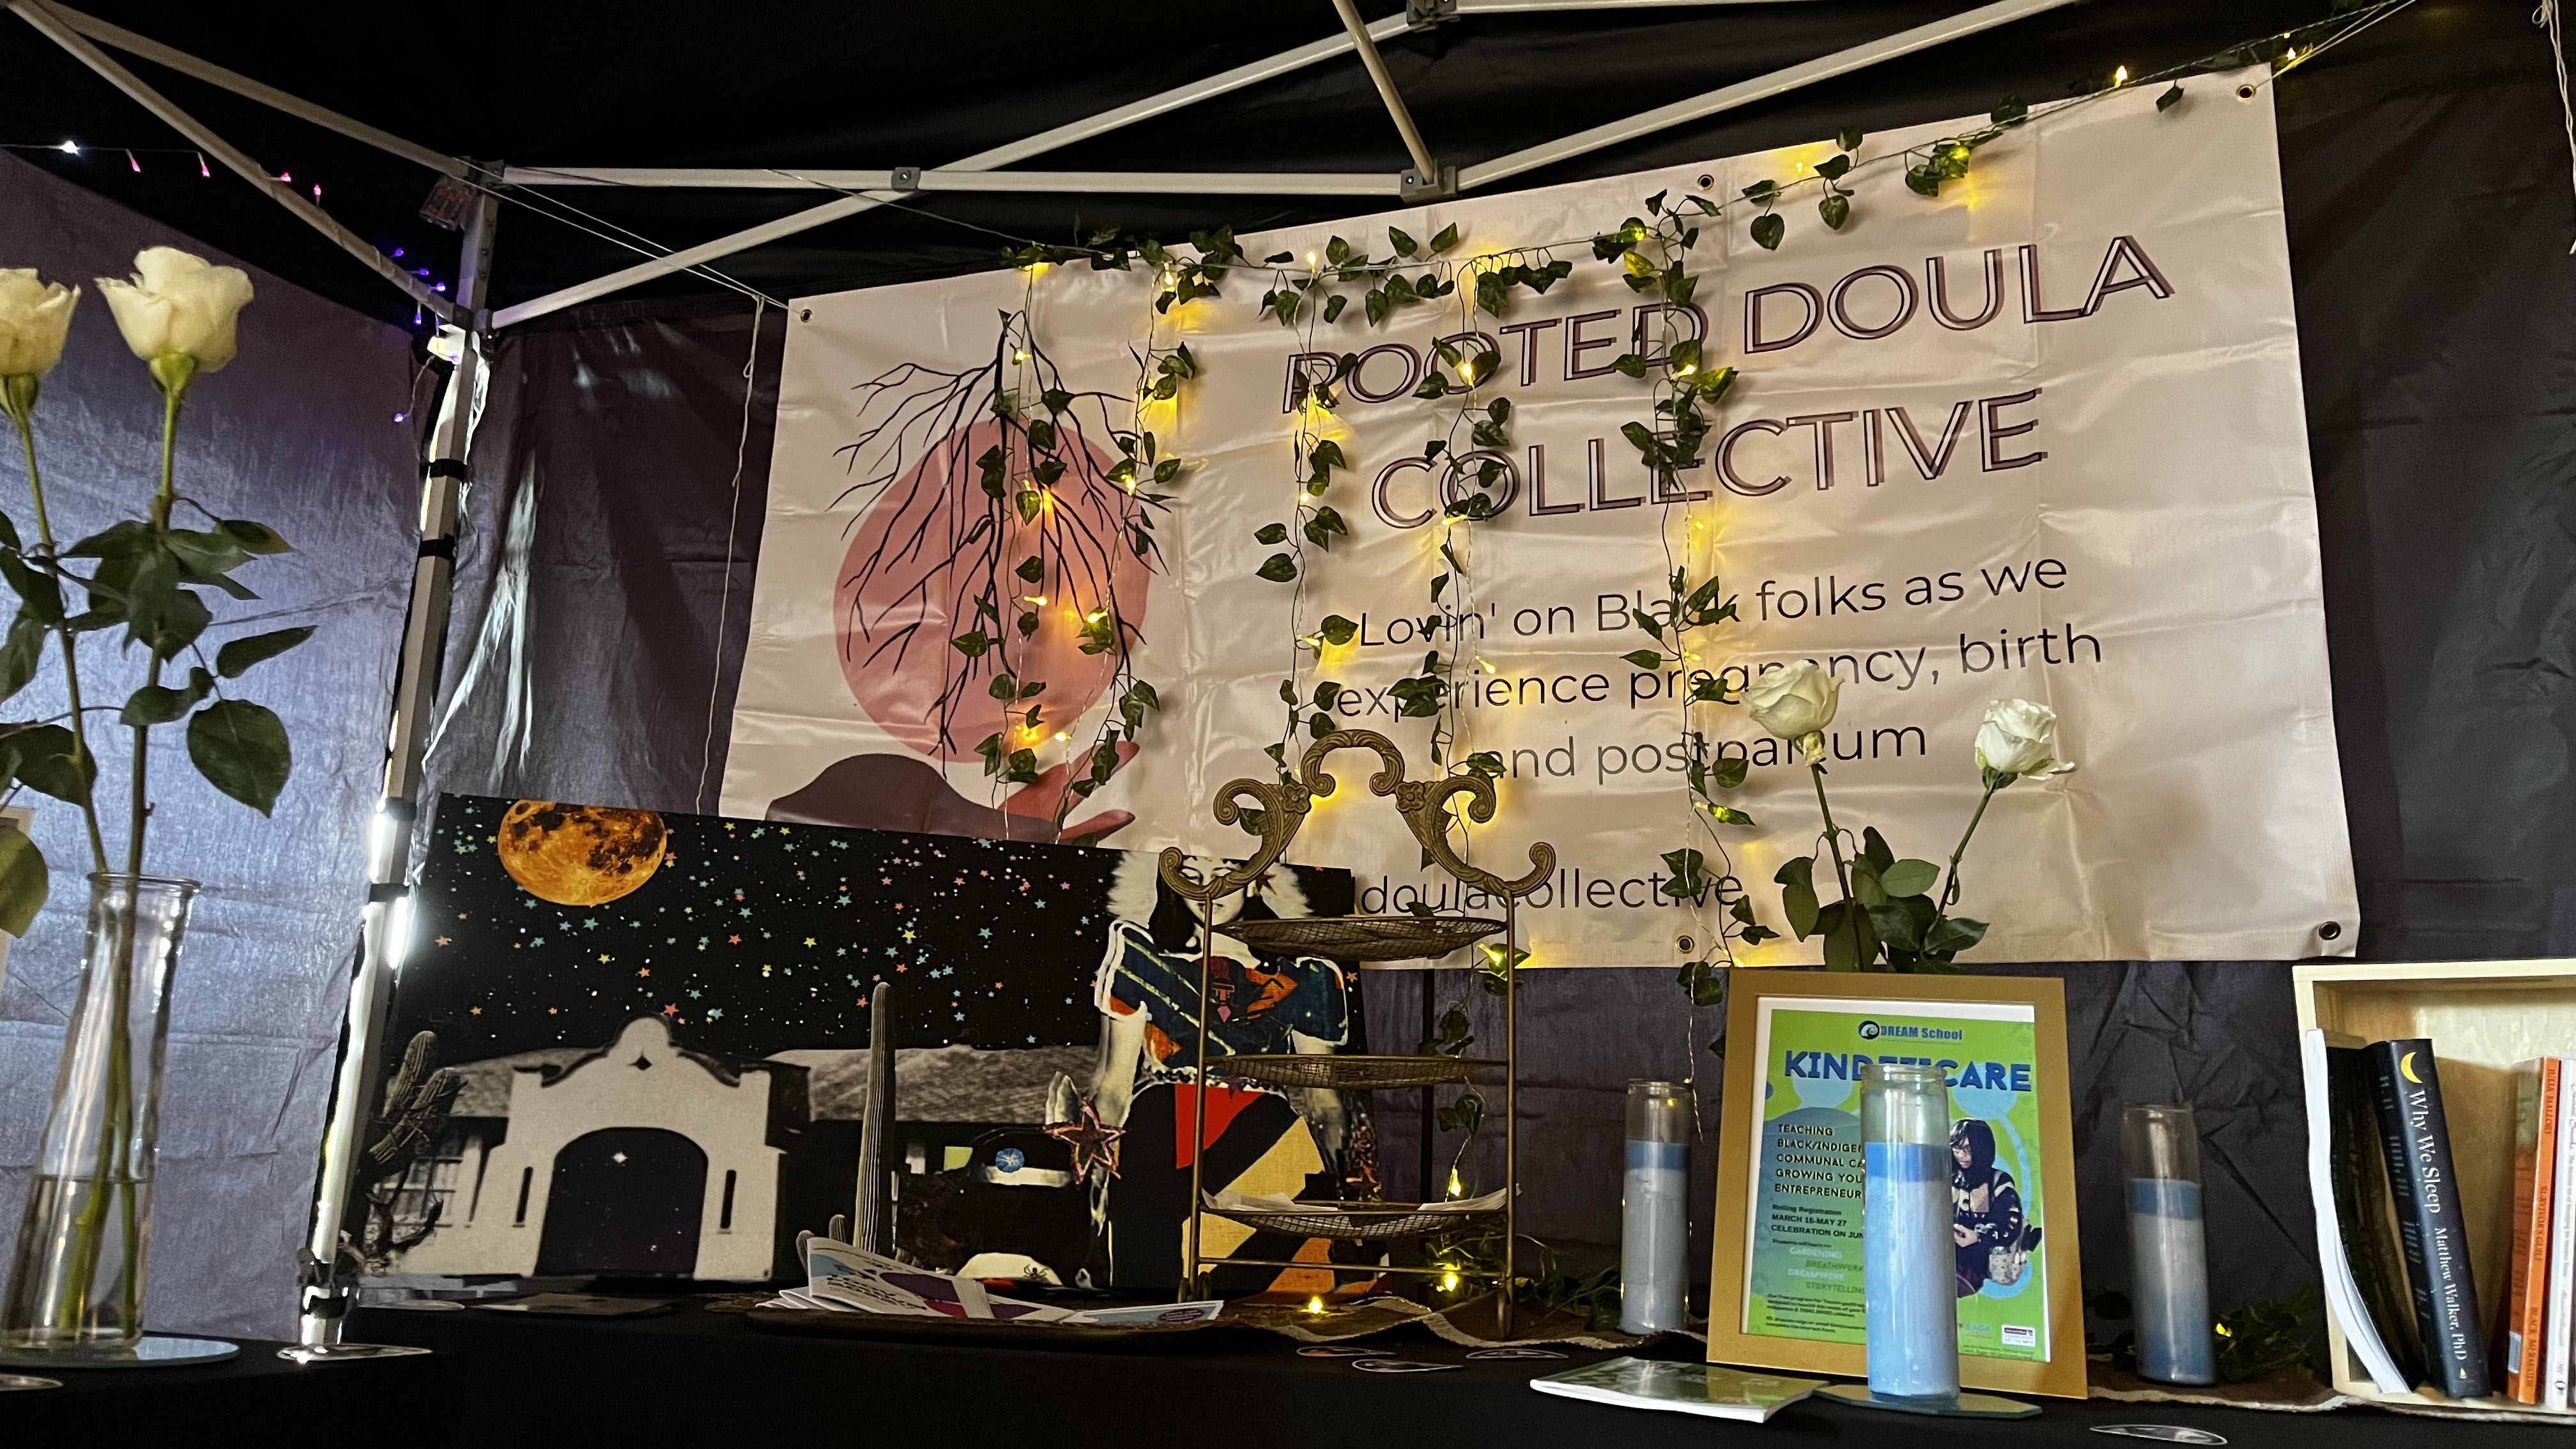 Rooted doula collective spotlight